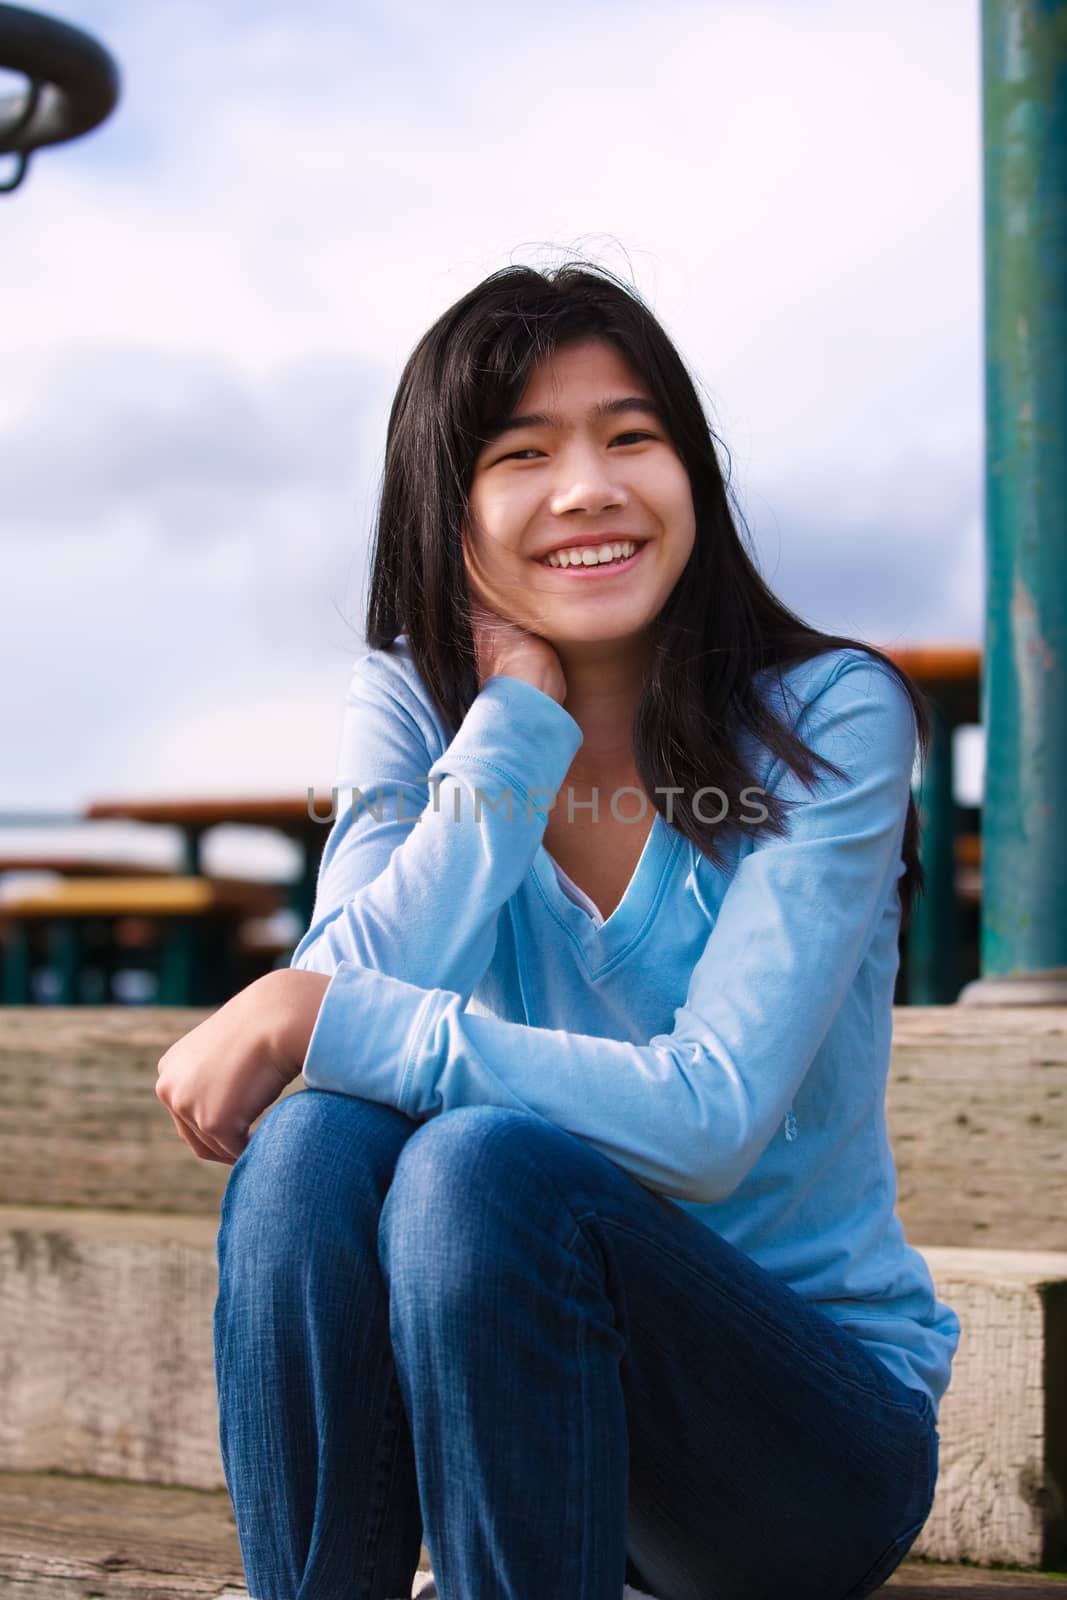 Young biracial teen girl in blue shirt and jeans sitting on wooden steps outdoors on overcast cloudy day